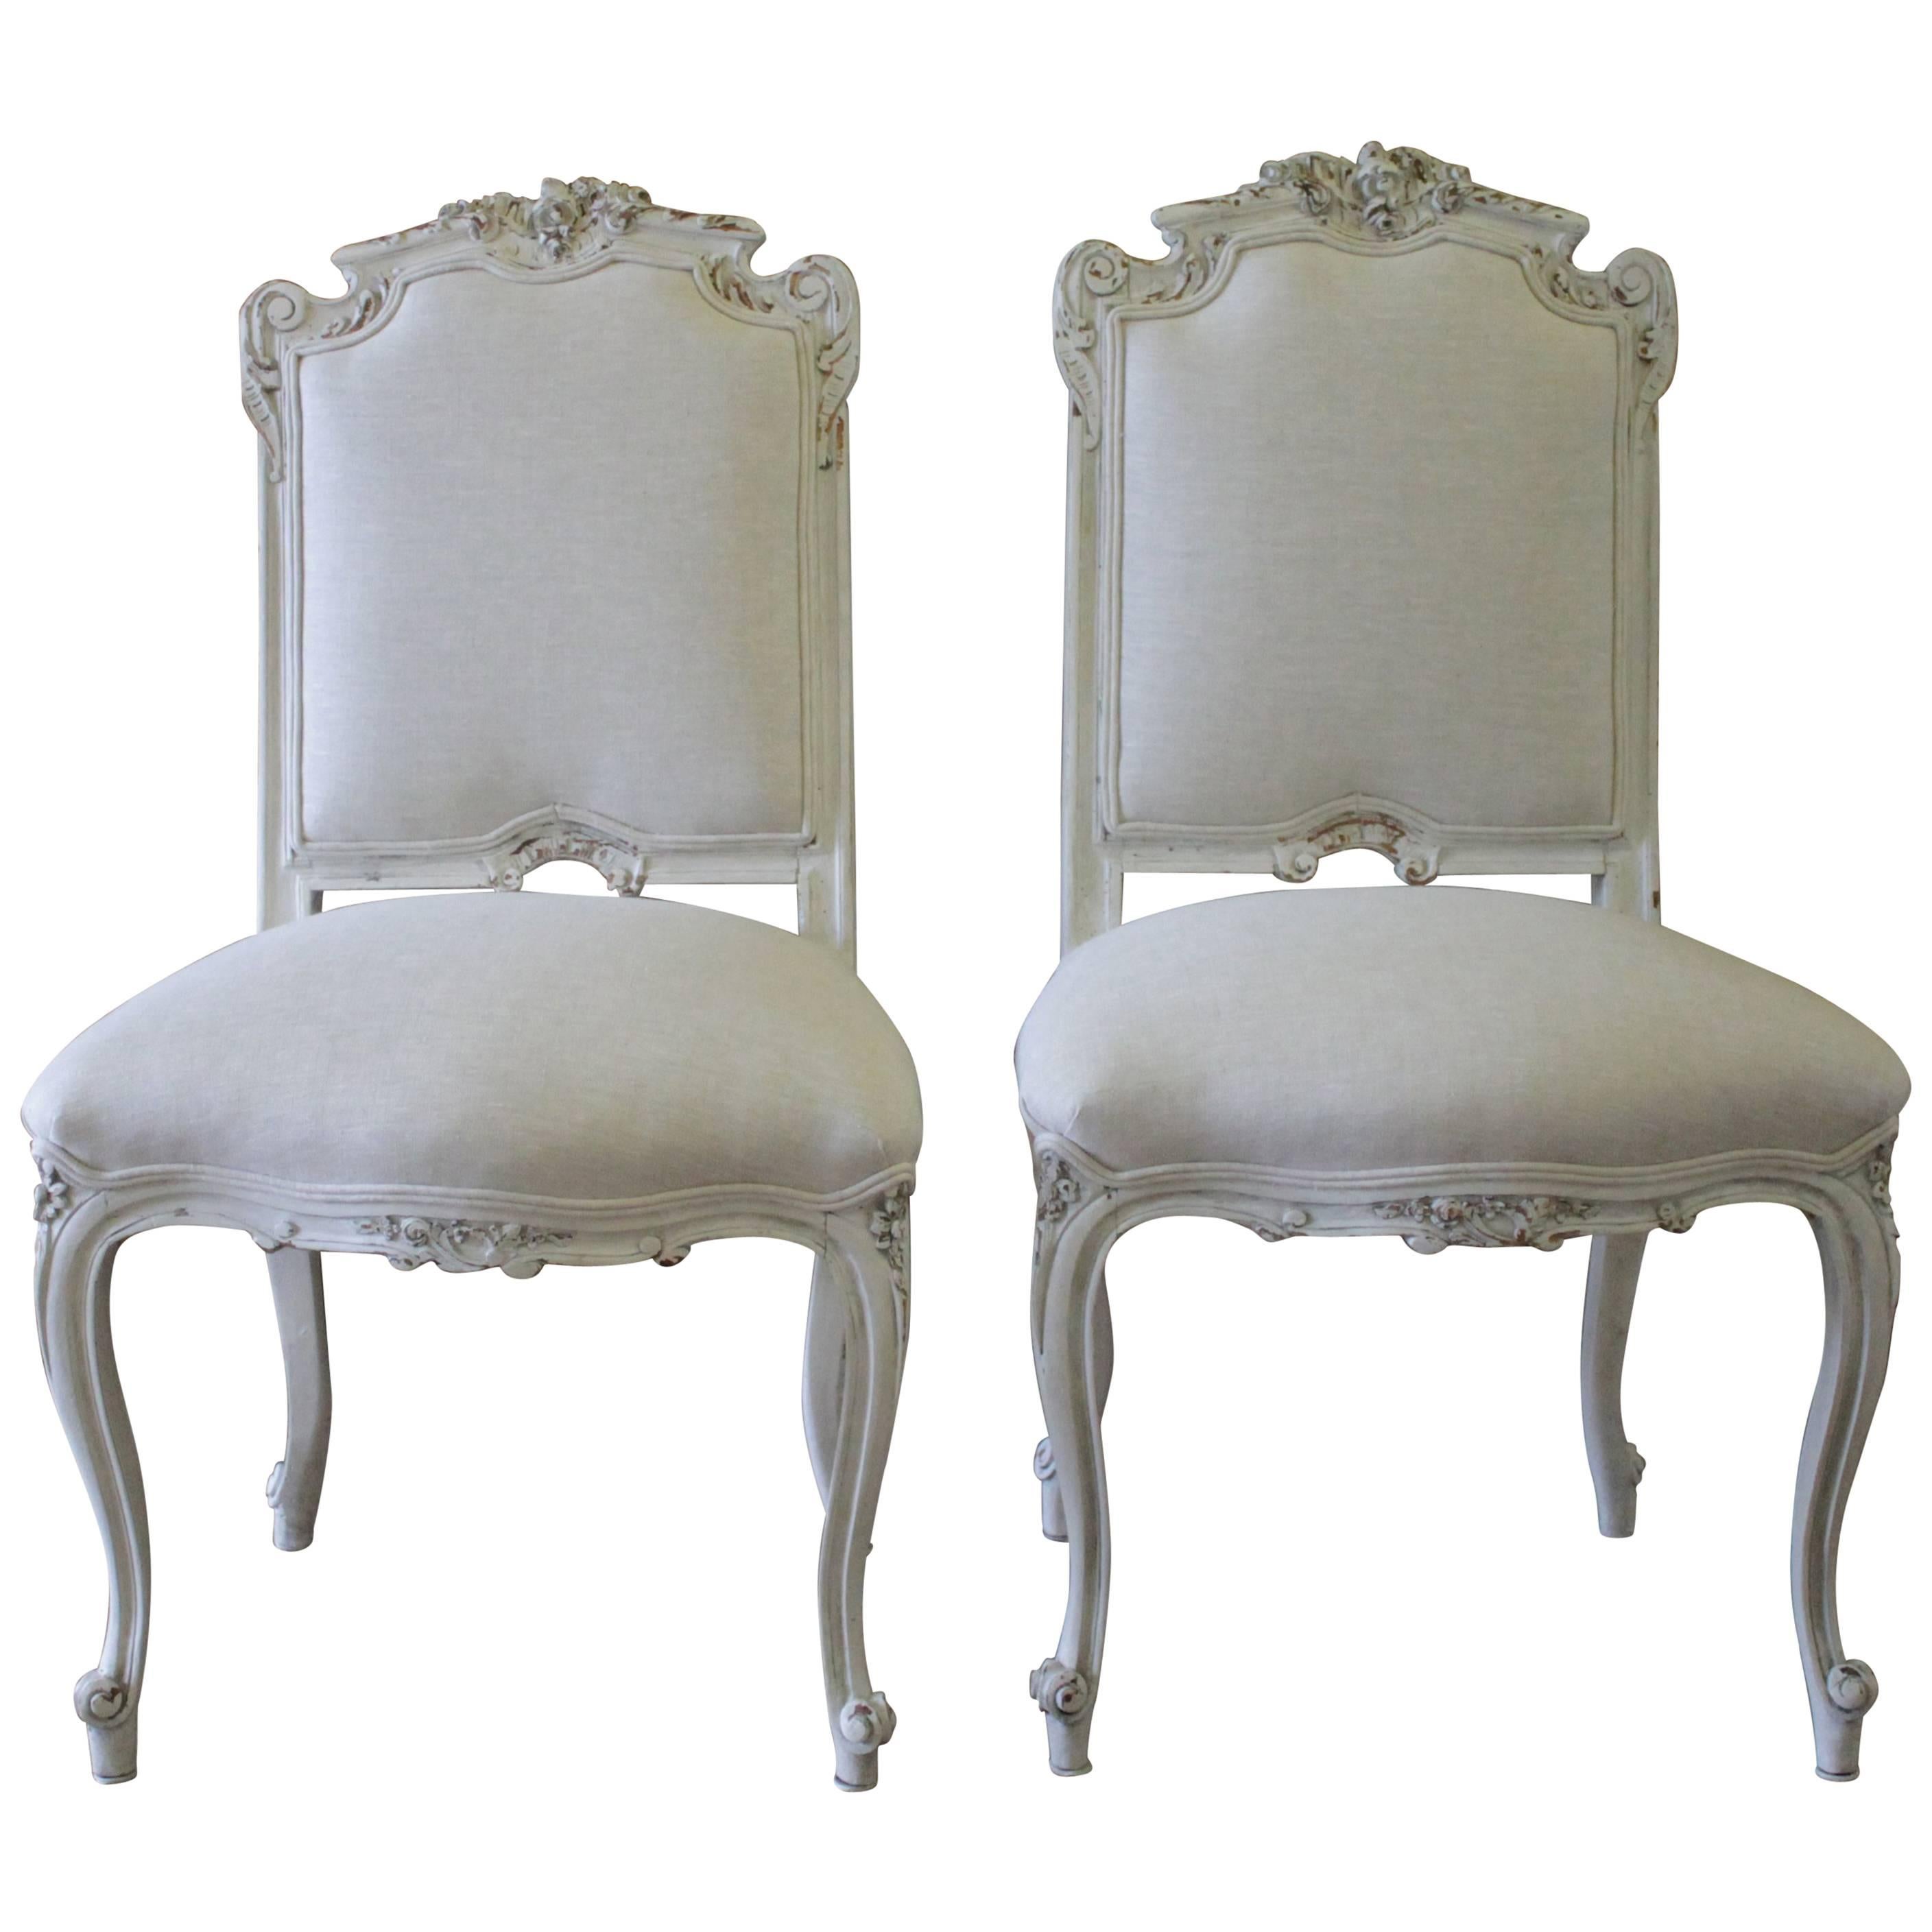 19th Century Antique Carved and Painted Rococo Style Vanity Chairs in Linen